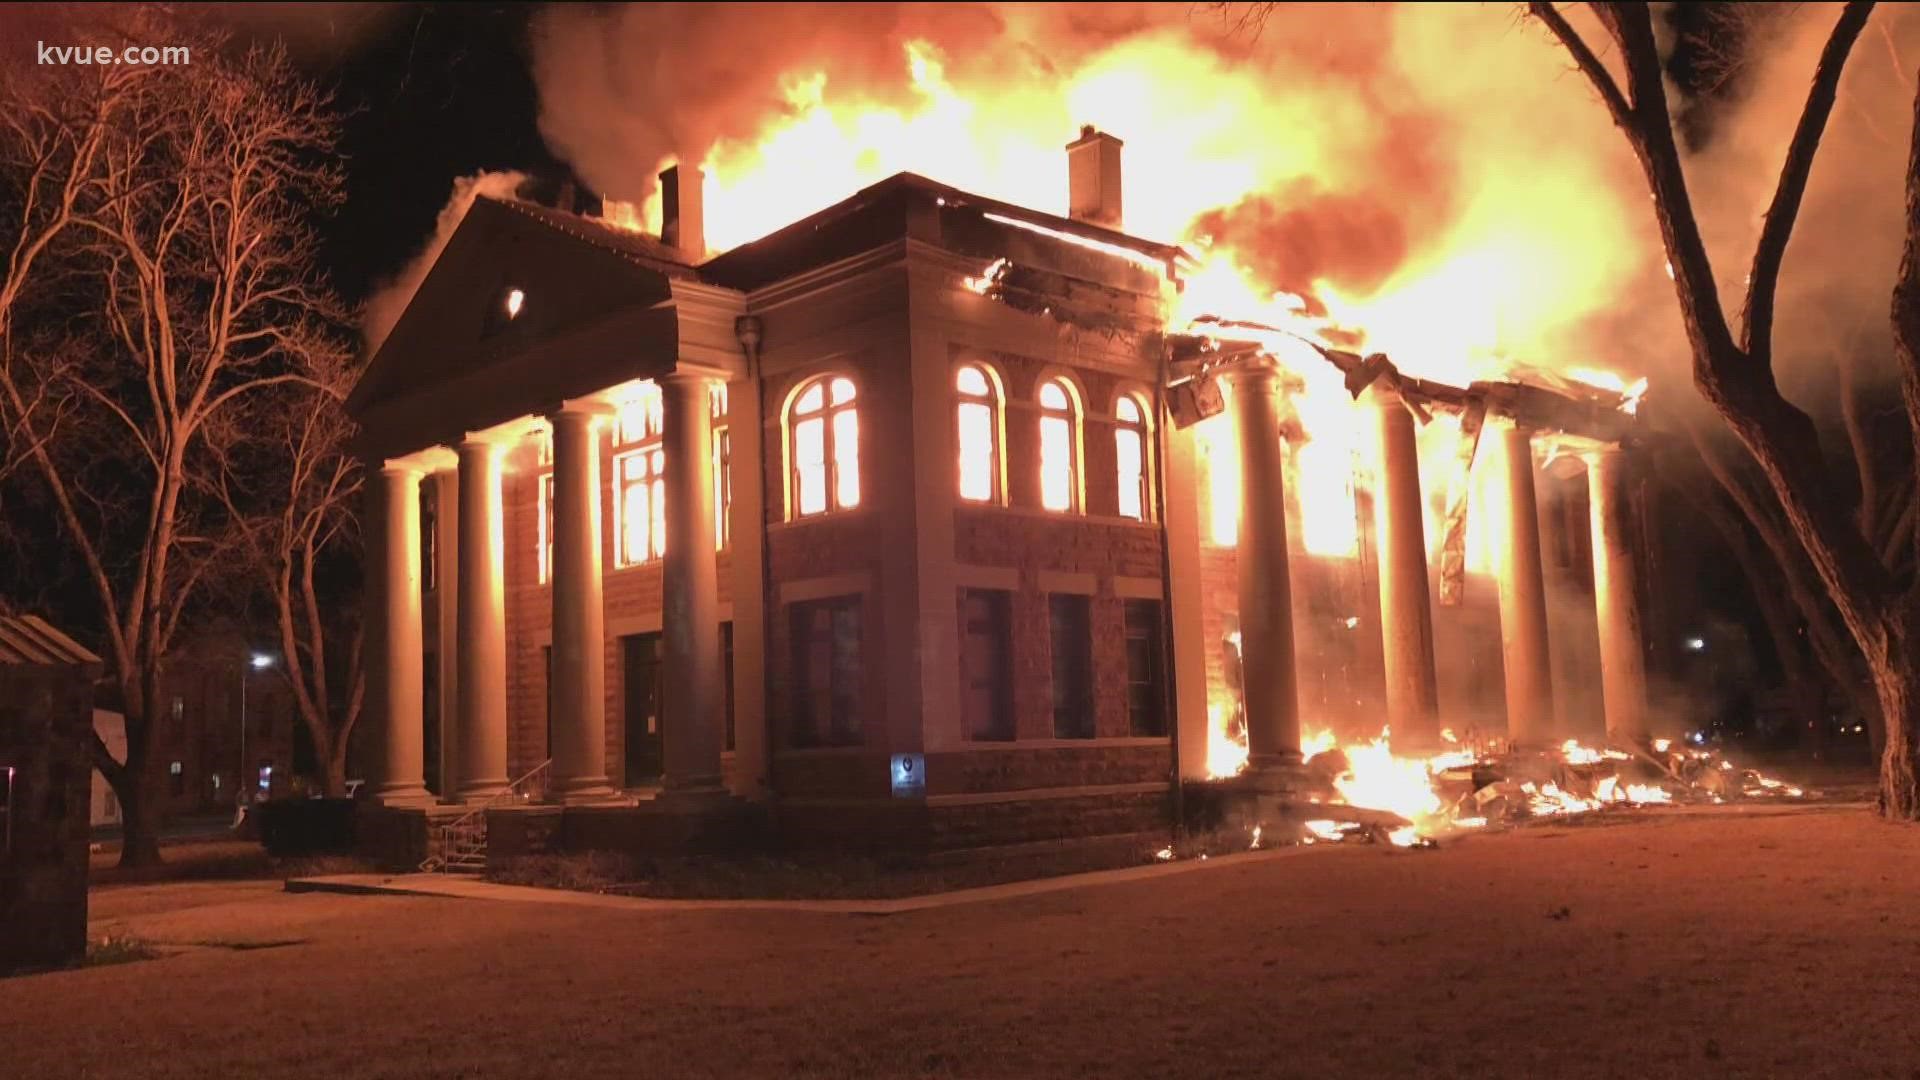 Six months ago, the Mason County Courthouse burned down. While the walls and foundation can be used, the project manager is planning around supply chain delays.